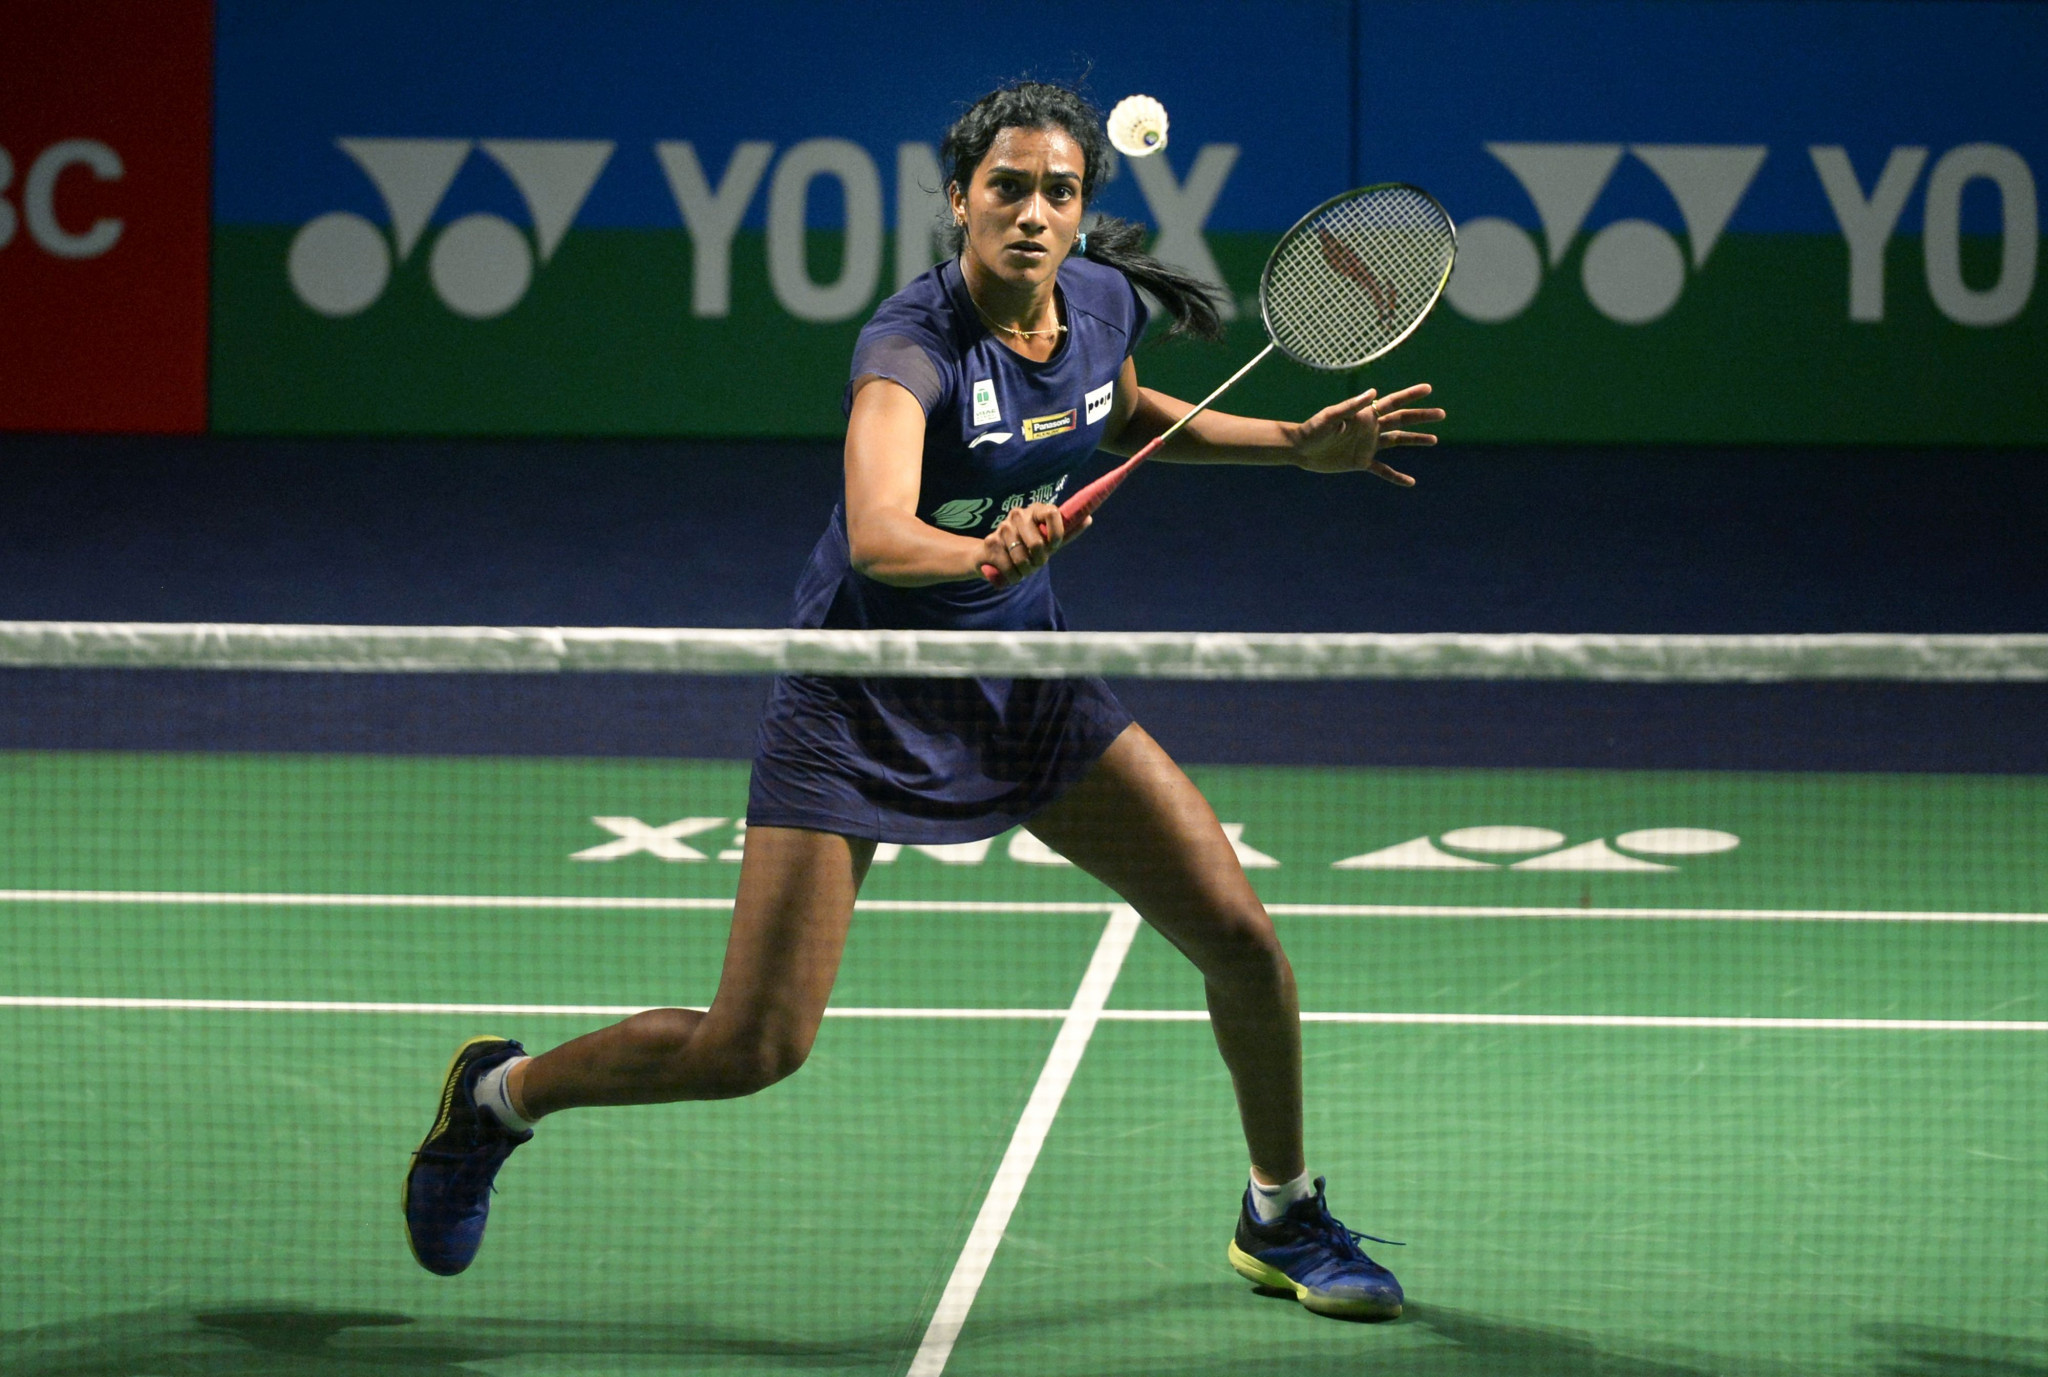 India's Pusarla Venkata Sindhu won her opening match of the BWF Malaysia Open ©Getty Images